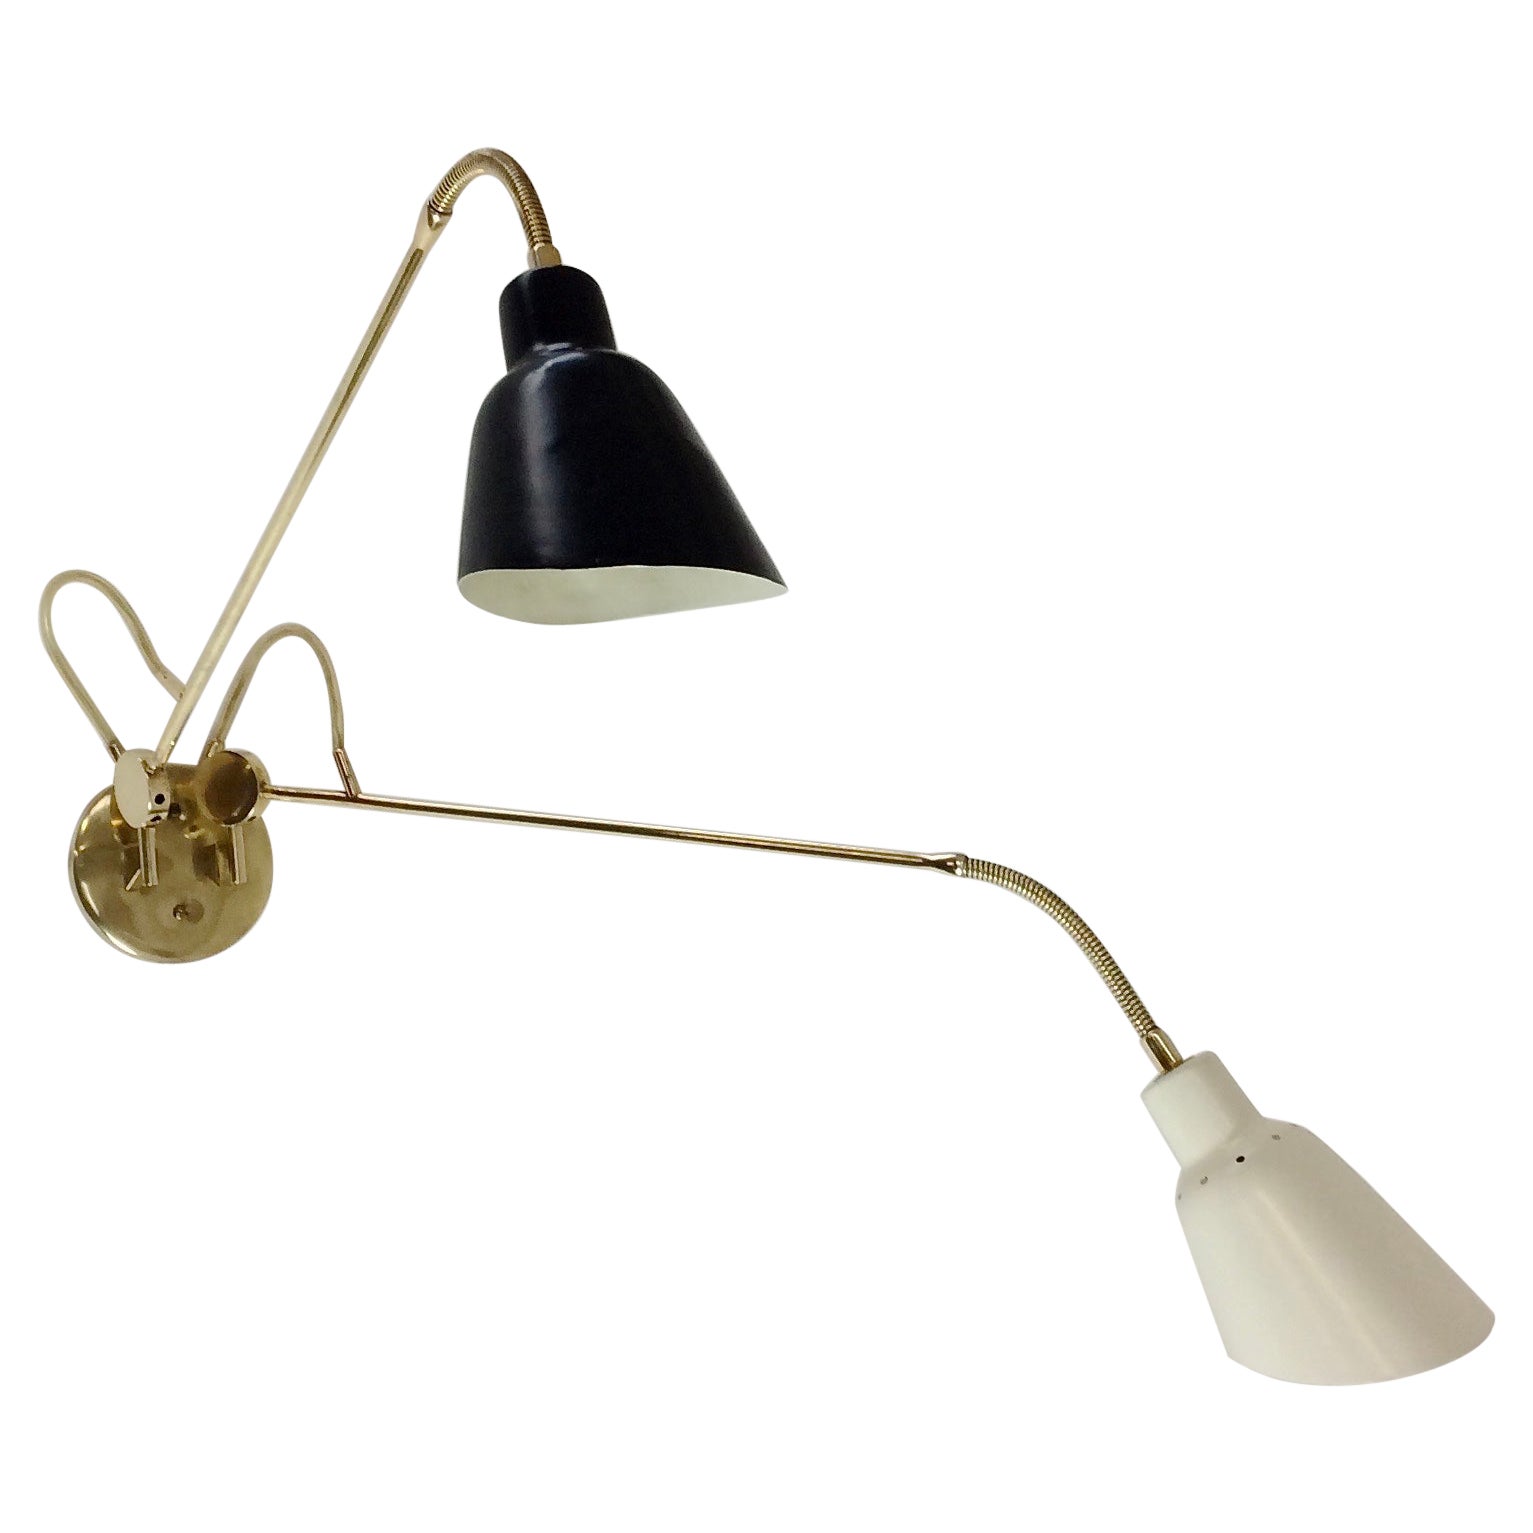 Rare original Angelo Lelli wall light for Arredoluce, circa 1952, Italy.
Structure in polished brass, two arms mounted on flexible tubes adjustable by pierced wheel on brass bolt.
Original label Arredoluce Monza, Made in Italy.
Dimensions: 75 cm L